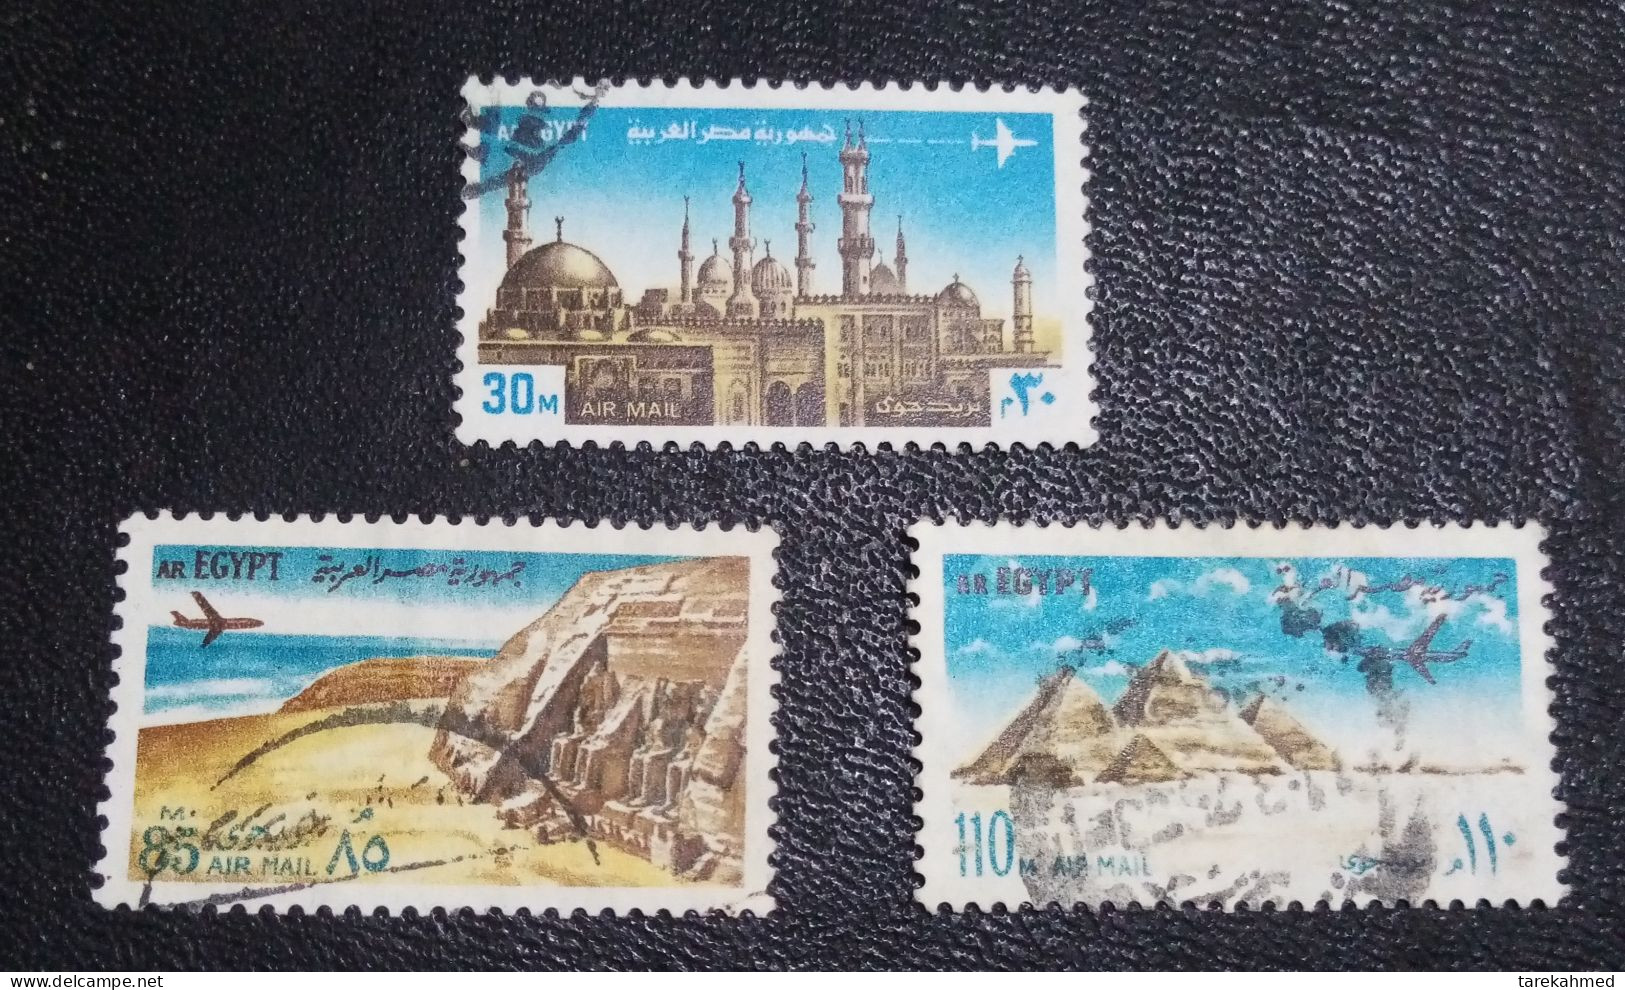 EGYPT 1972 - AIR MAIL STAMPS Complete SET, SG # 1170/72, VF - Used Stamps